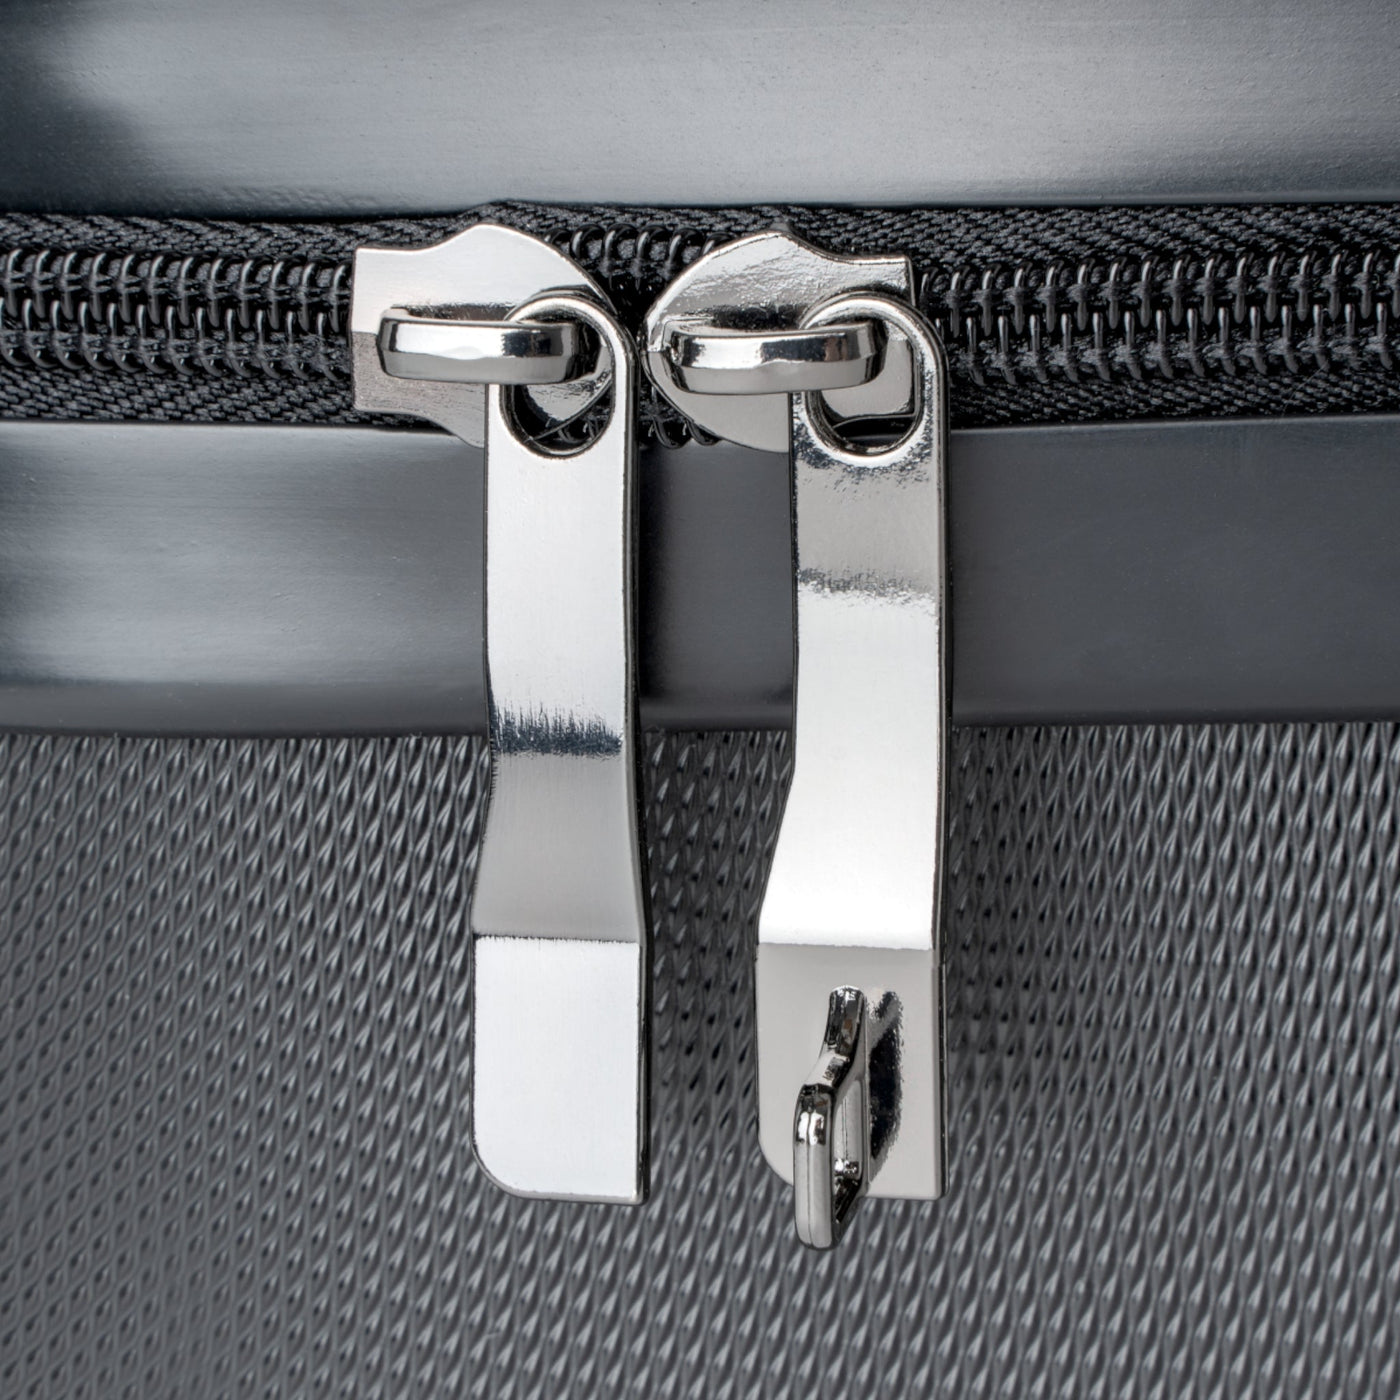 See the World Carry-on Luggage